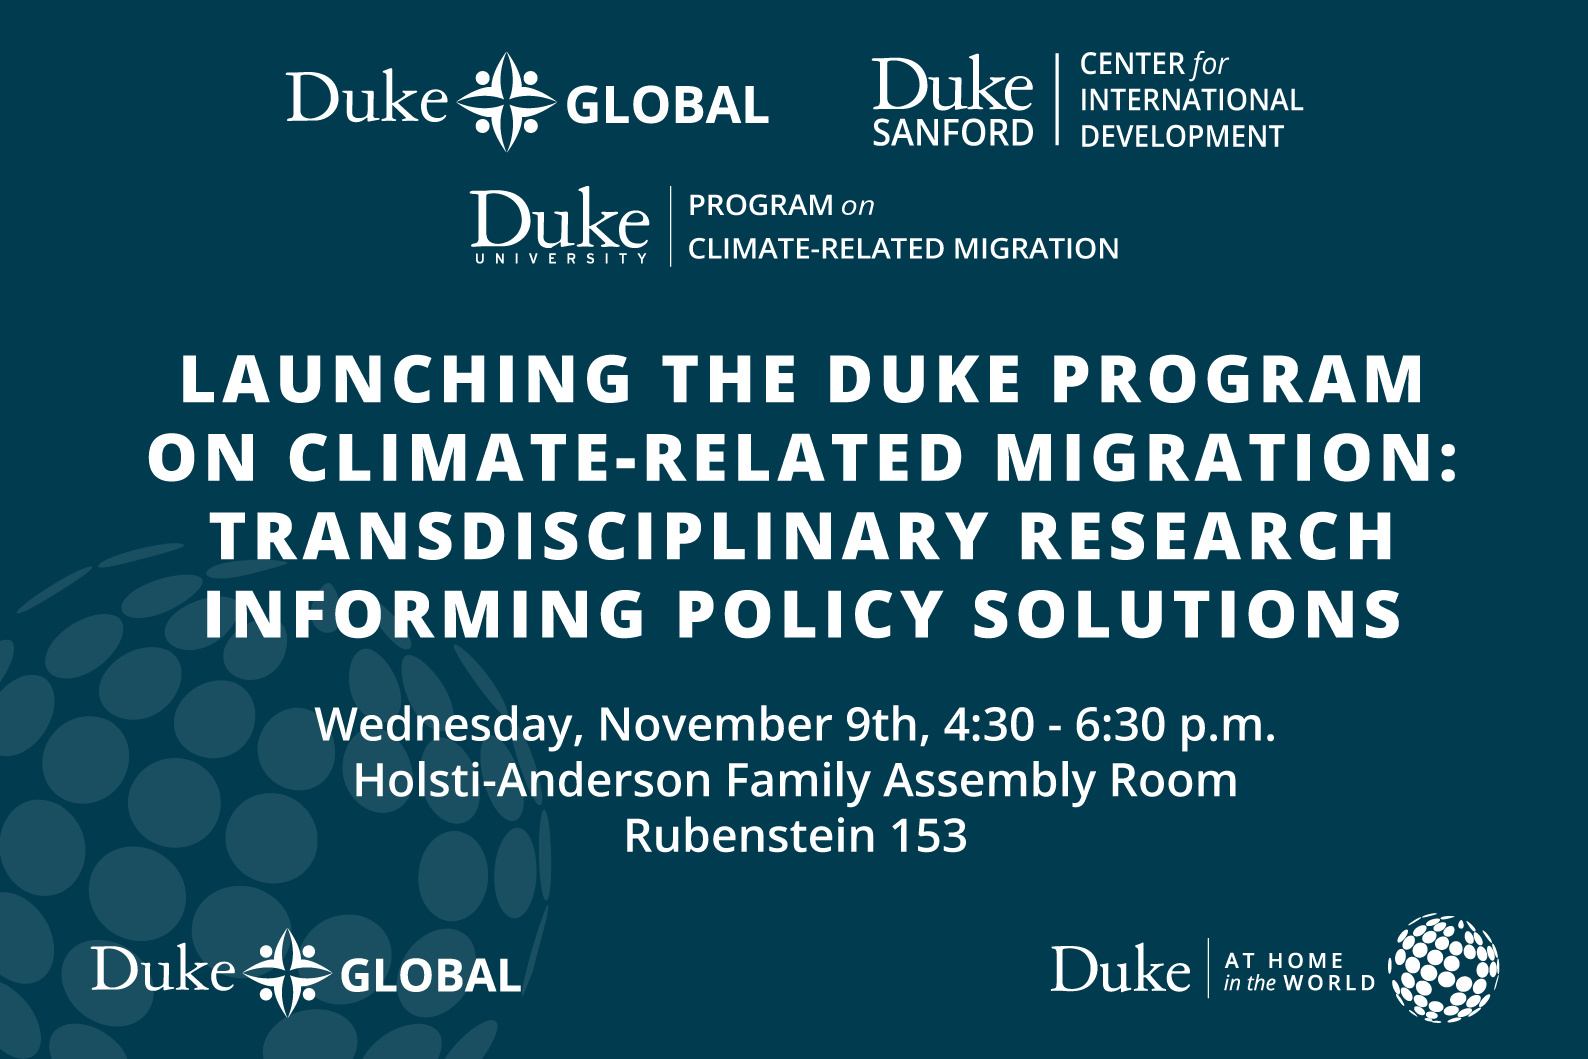 Launching the Duke Program on Climate-Related Migration: Transdisciplinary Research Informing Policy Solutions, Wednesday, November 9th, 4:30 - 6:30 p.m., Holsti-Anderson Family Assembly Room (Rubenstein 153)